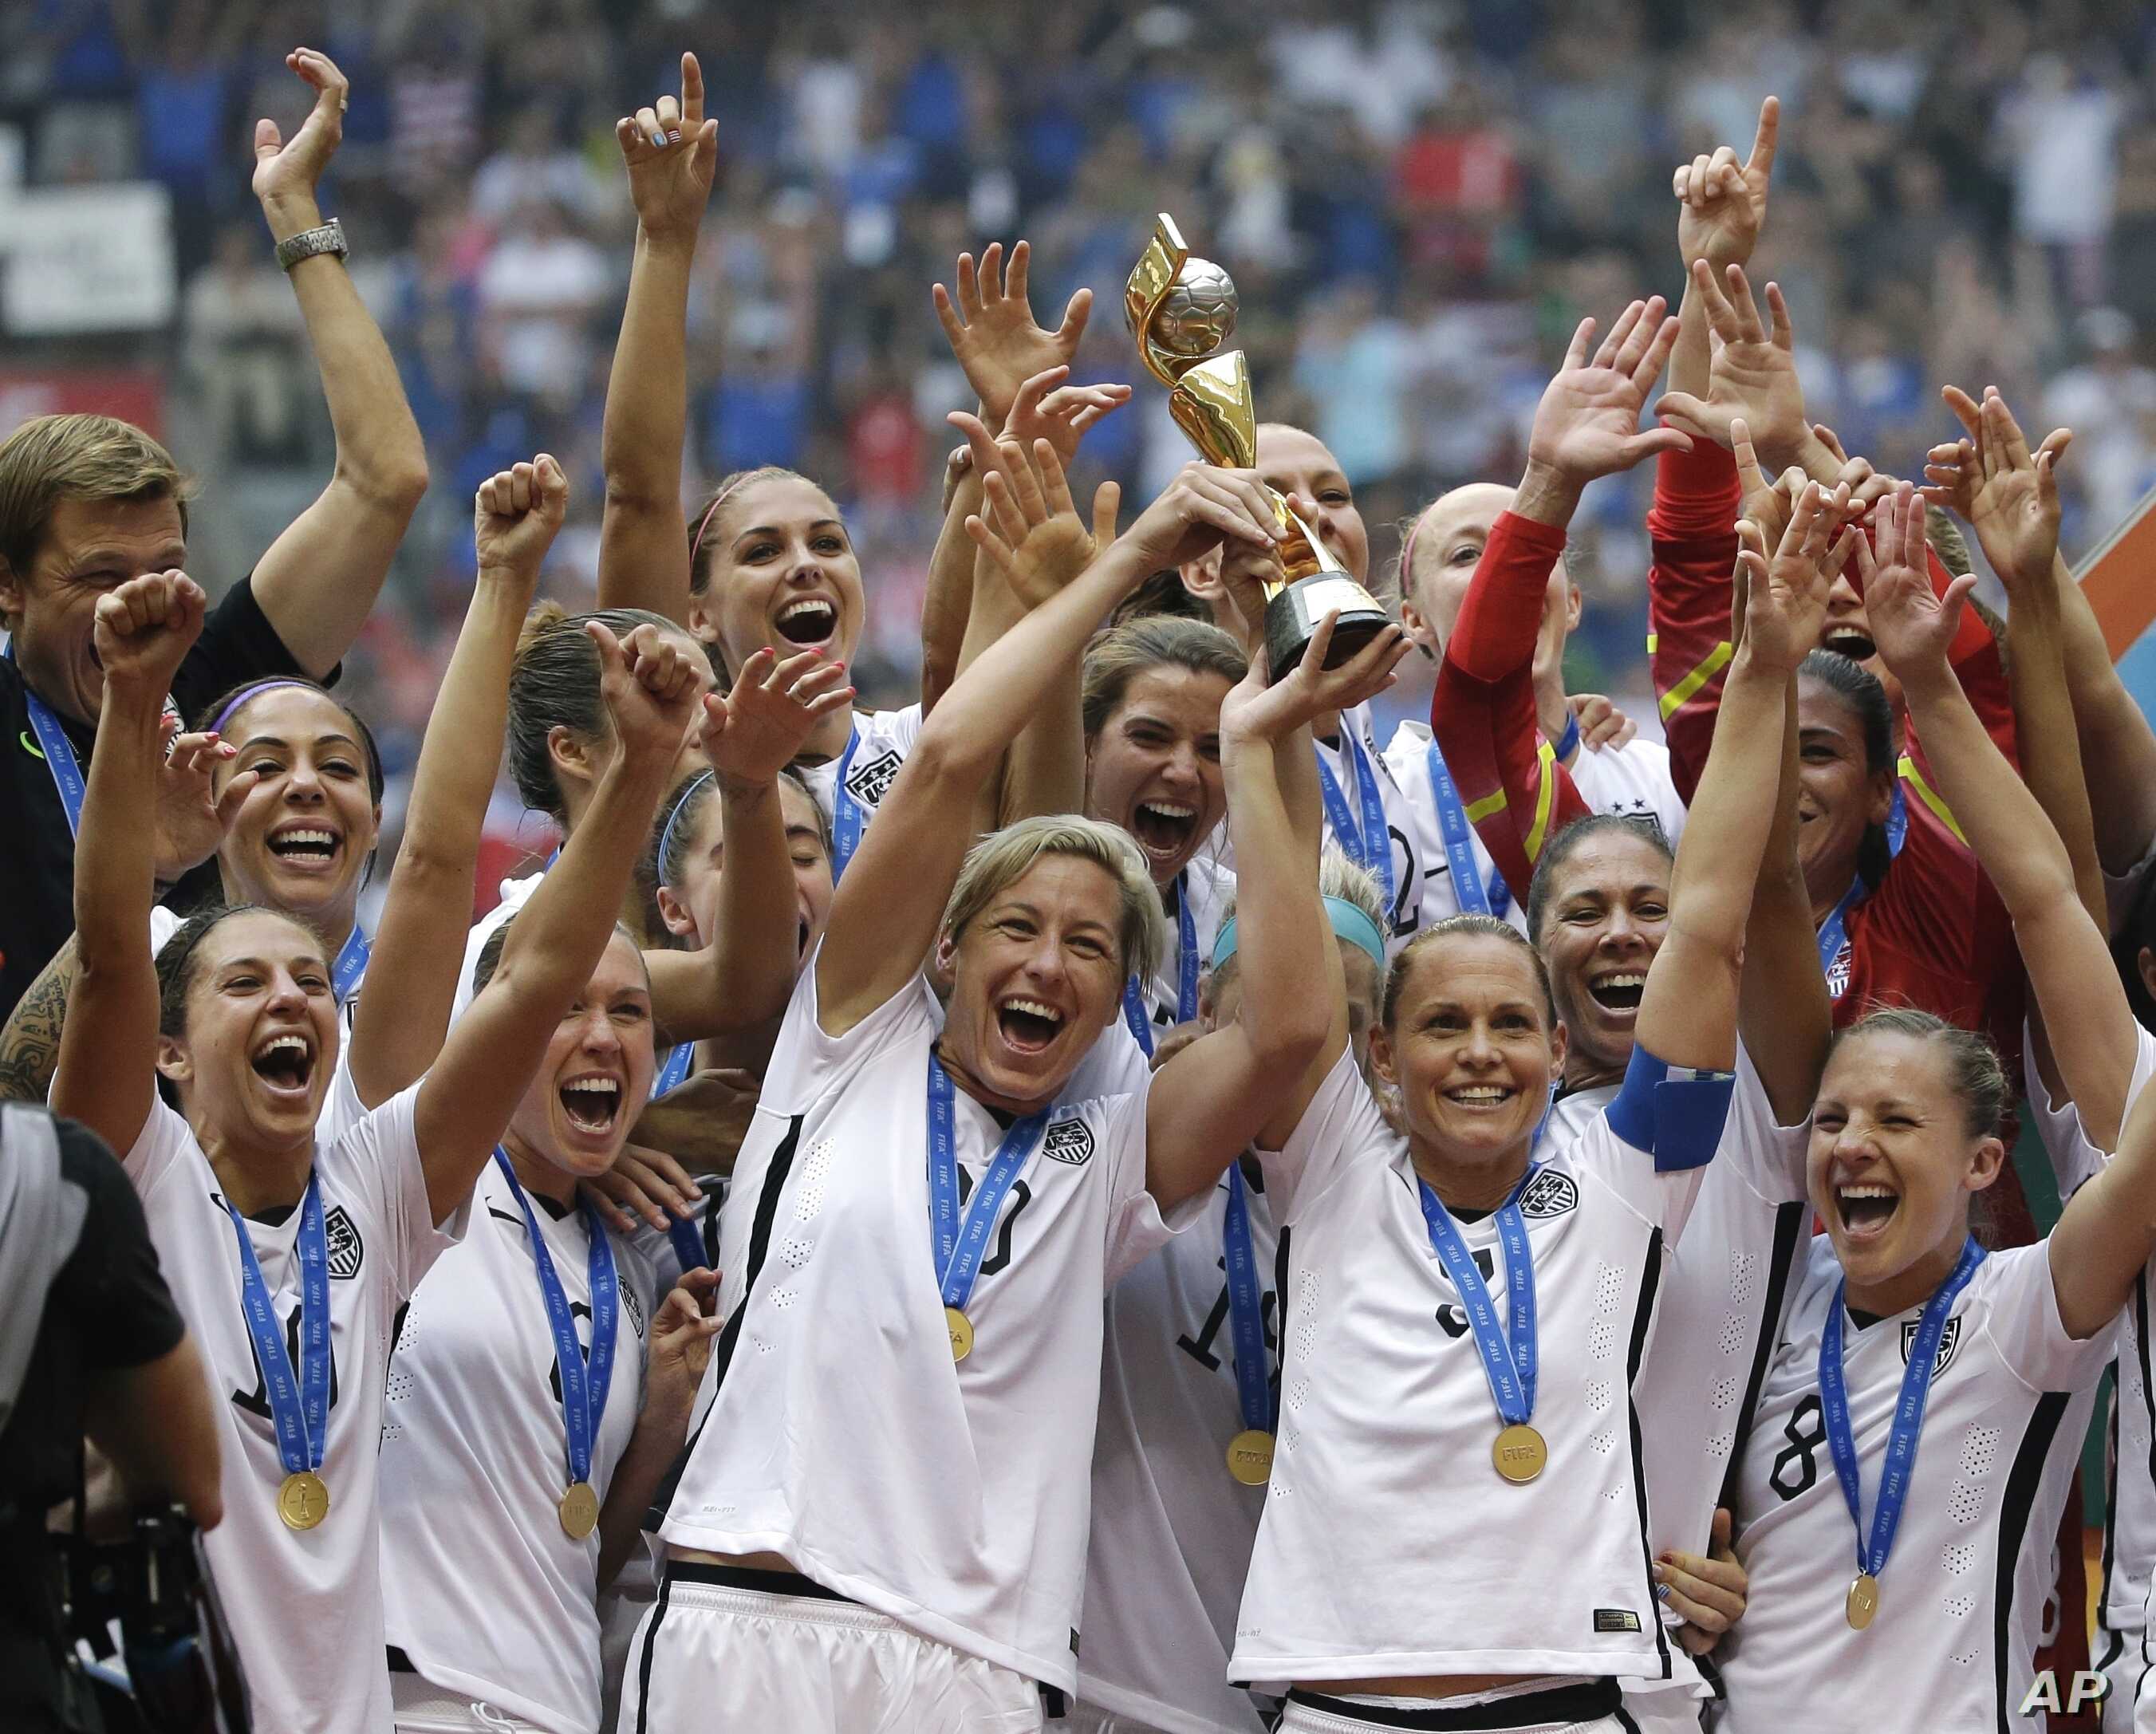 US Women's Soccer Team Gets New Contract. Voice of America